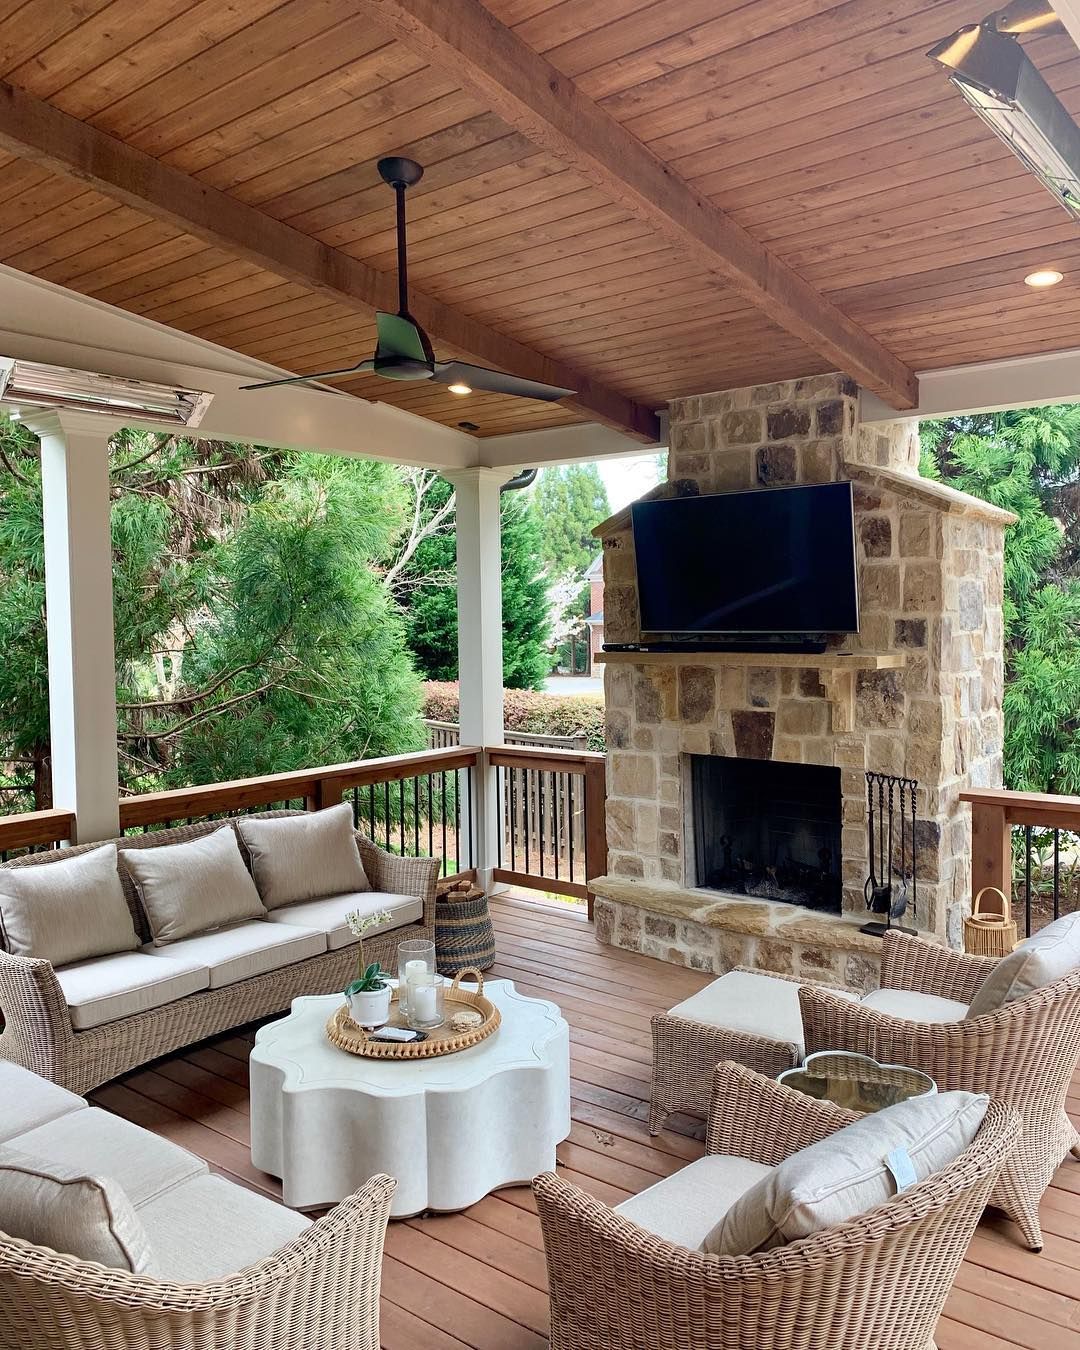 Enhance Your Outdoor Space with a Beautiful Covered Deck